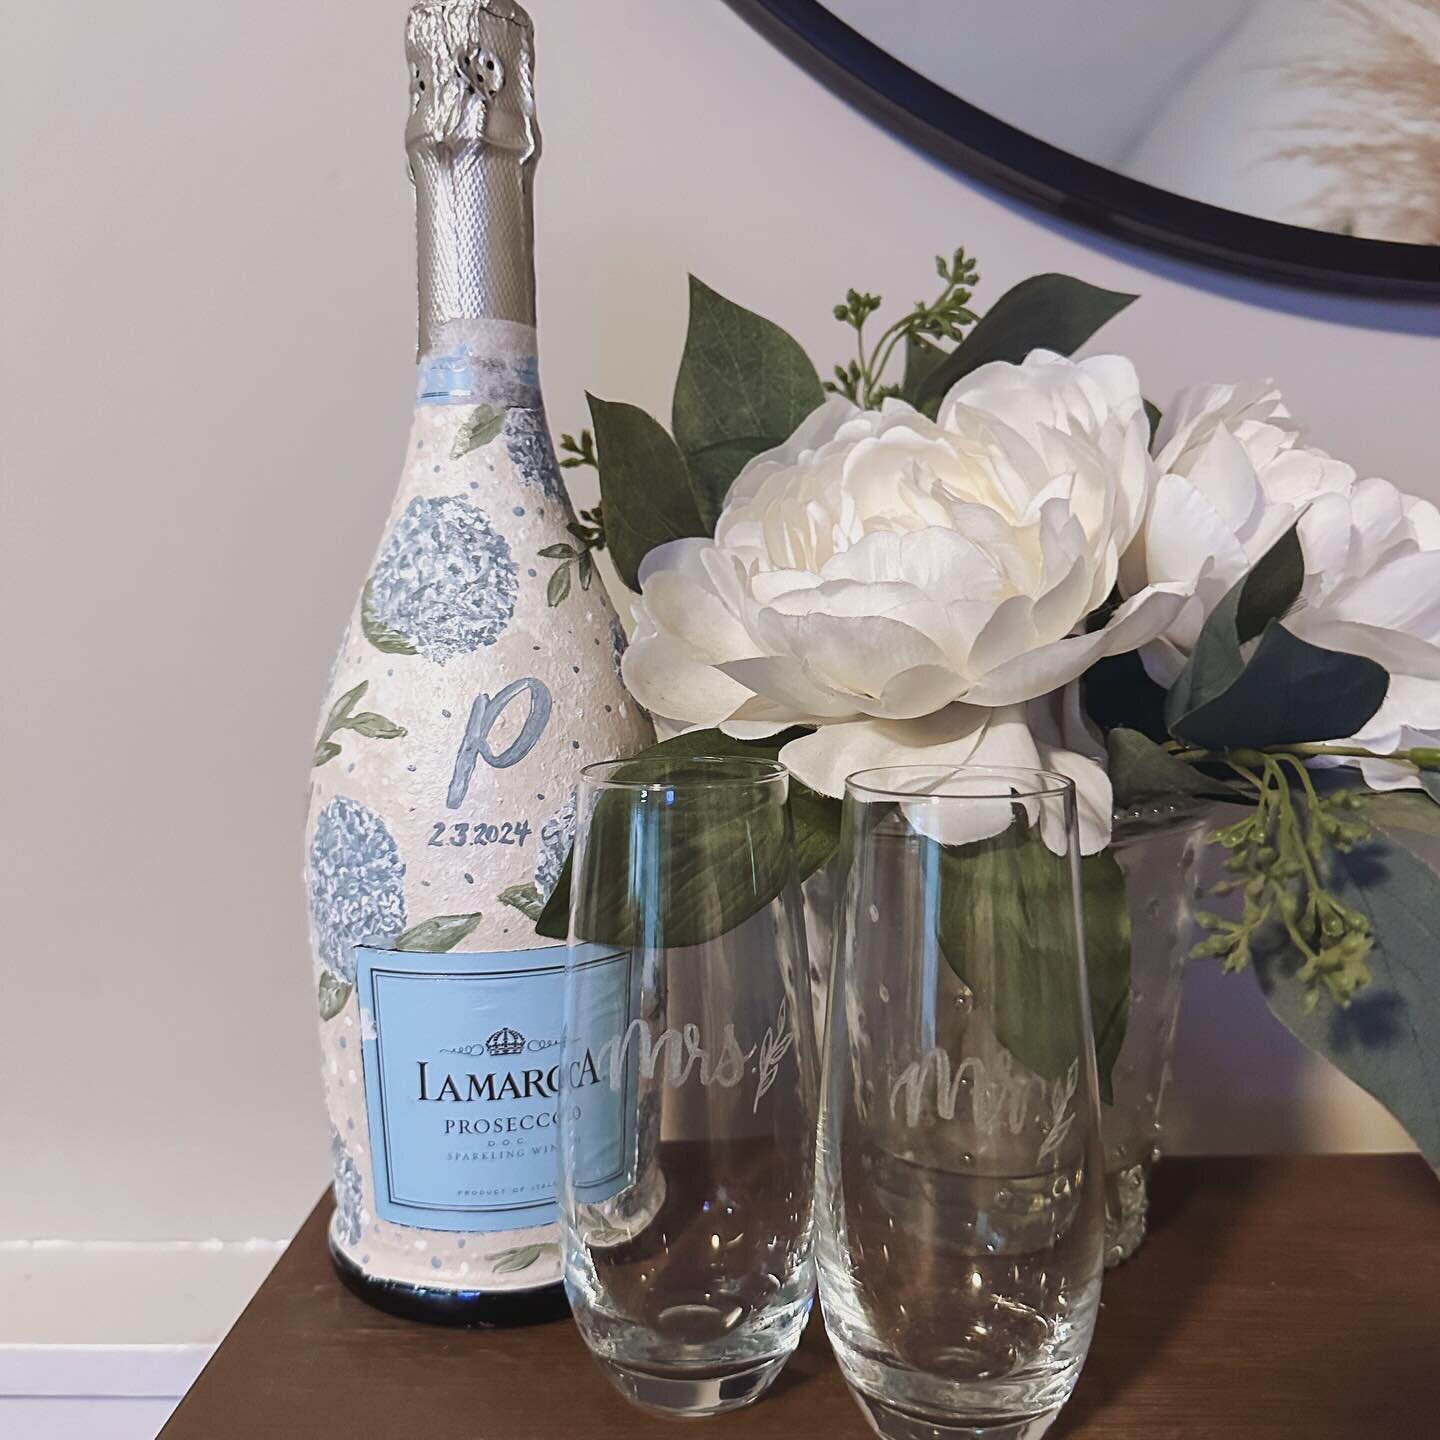 ❤️💗GIVEAWAY💗❤️ Excited to be doing a giveaway again, it&rsquo;s been a minute! Enter for your chance to win this hand painted hydrangea Prosecco bottle (with your choice of wording) &amp; 2 hand engraved Mr. &amp; Mrs. stemless champagne flutes 💞 